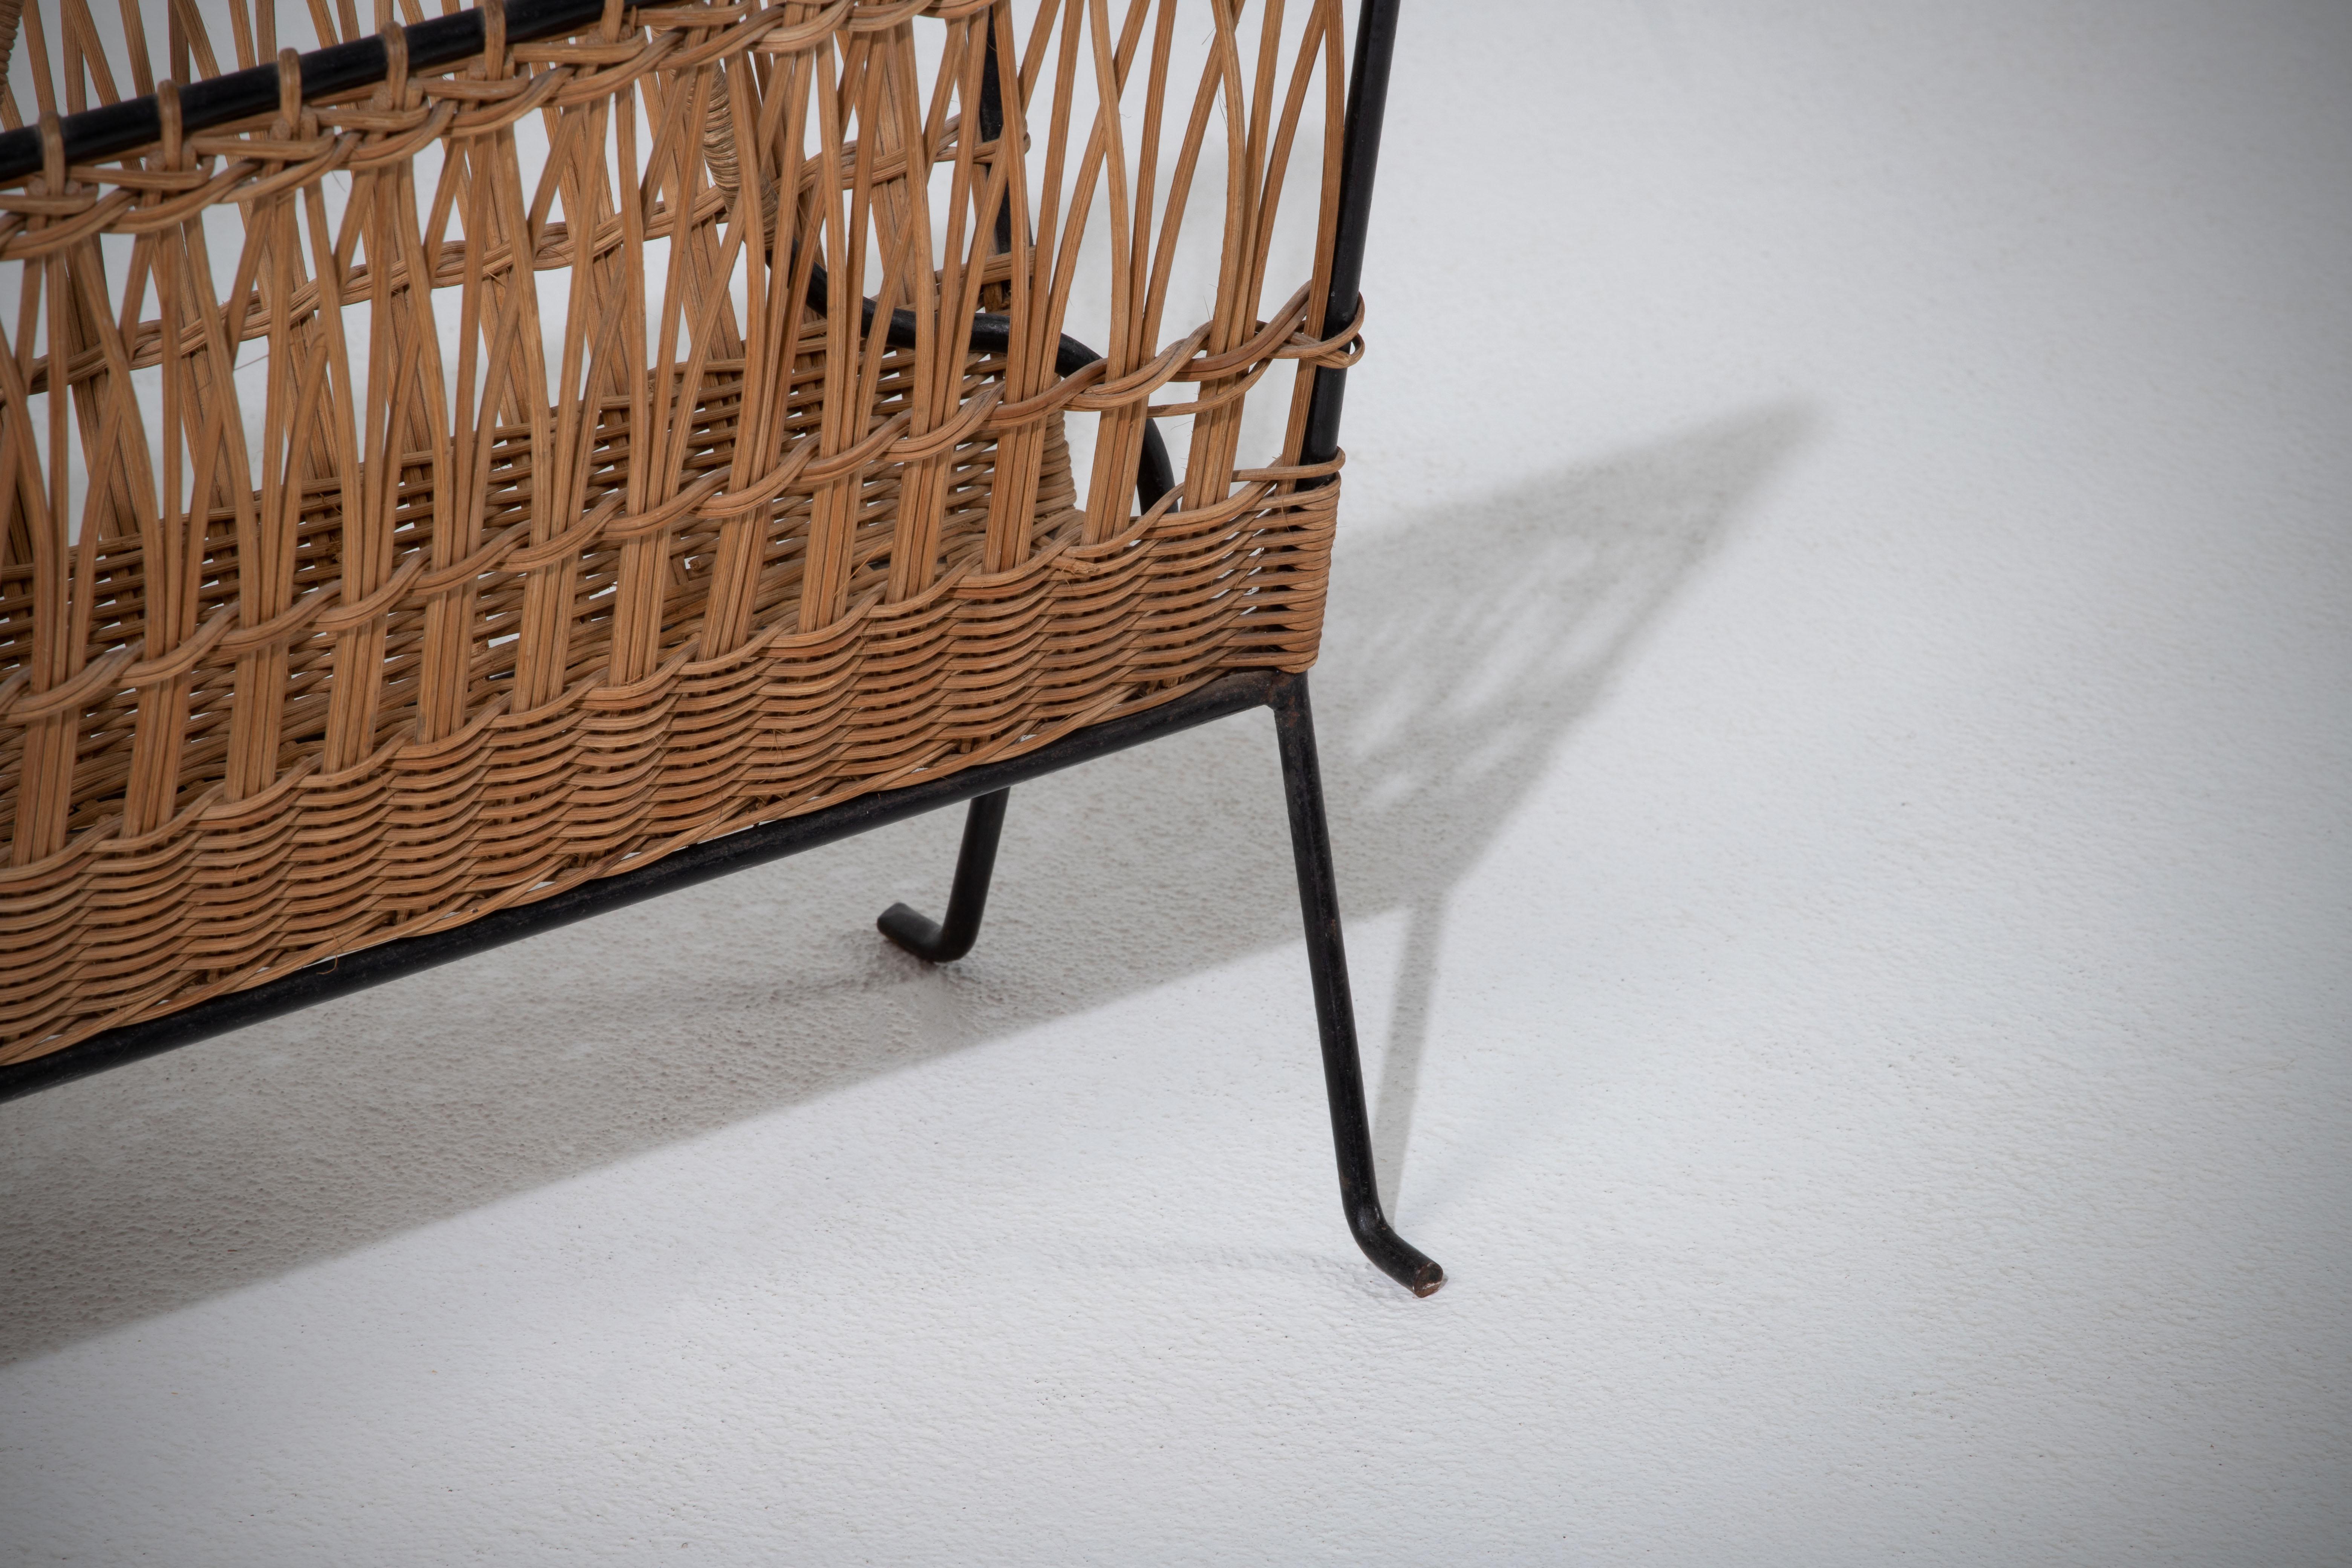 Rattan Jacques Adnet Wicker Magazine Rack with Black Iron Frame, Brass Ball Feet, 1950s For Sale